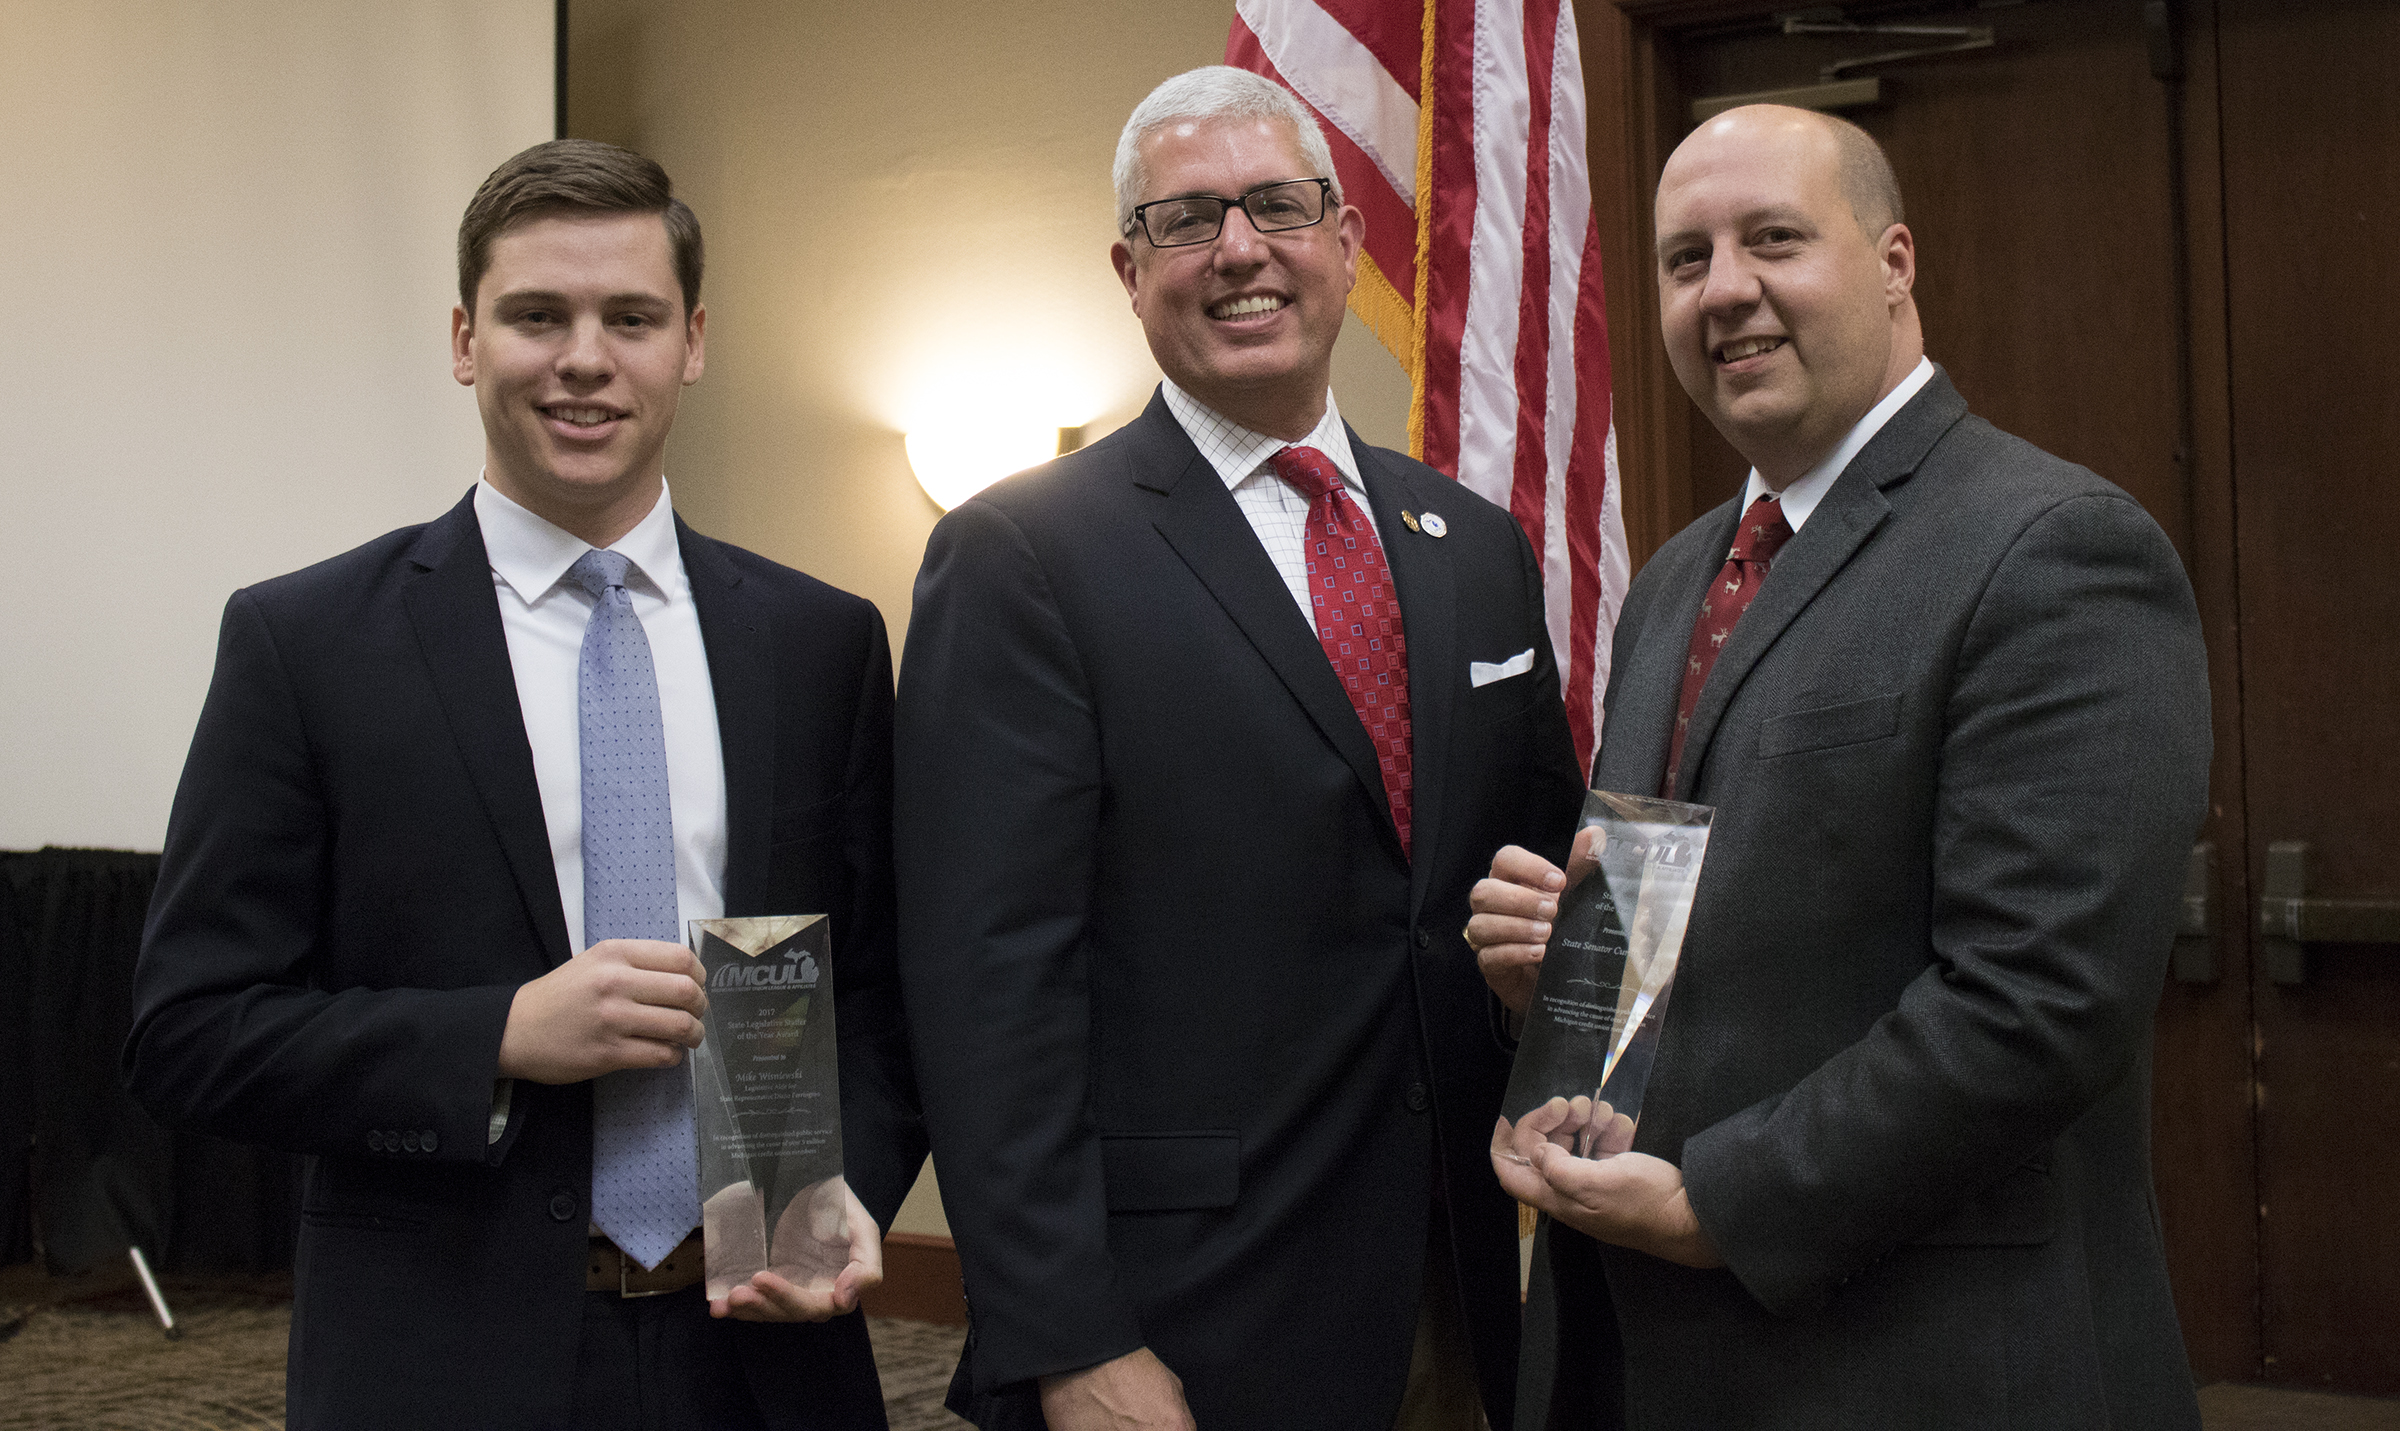 2017 Lawmaker and Staffer of the Year